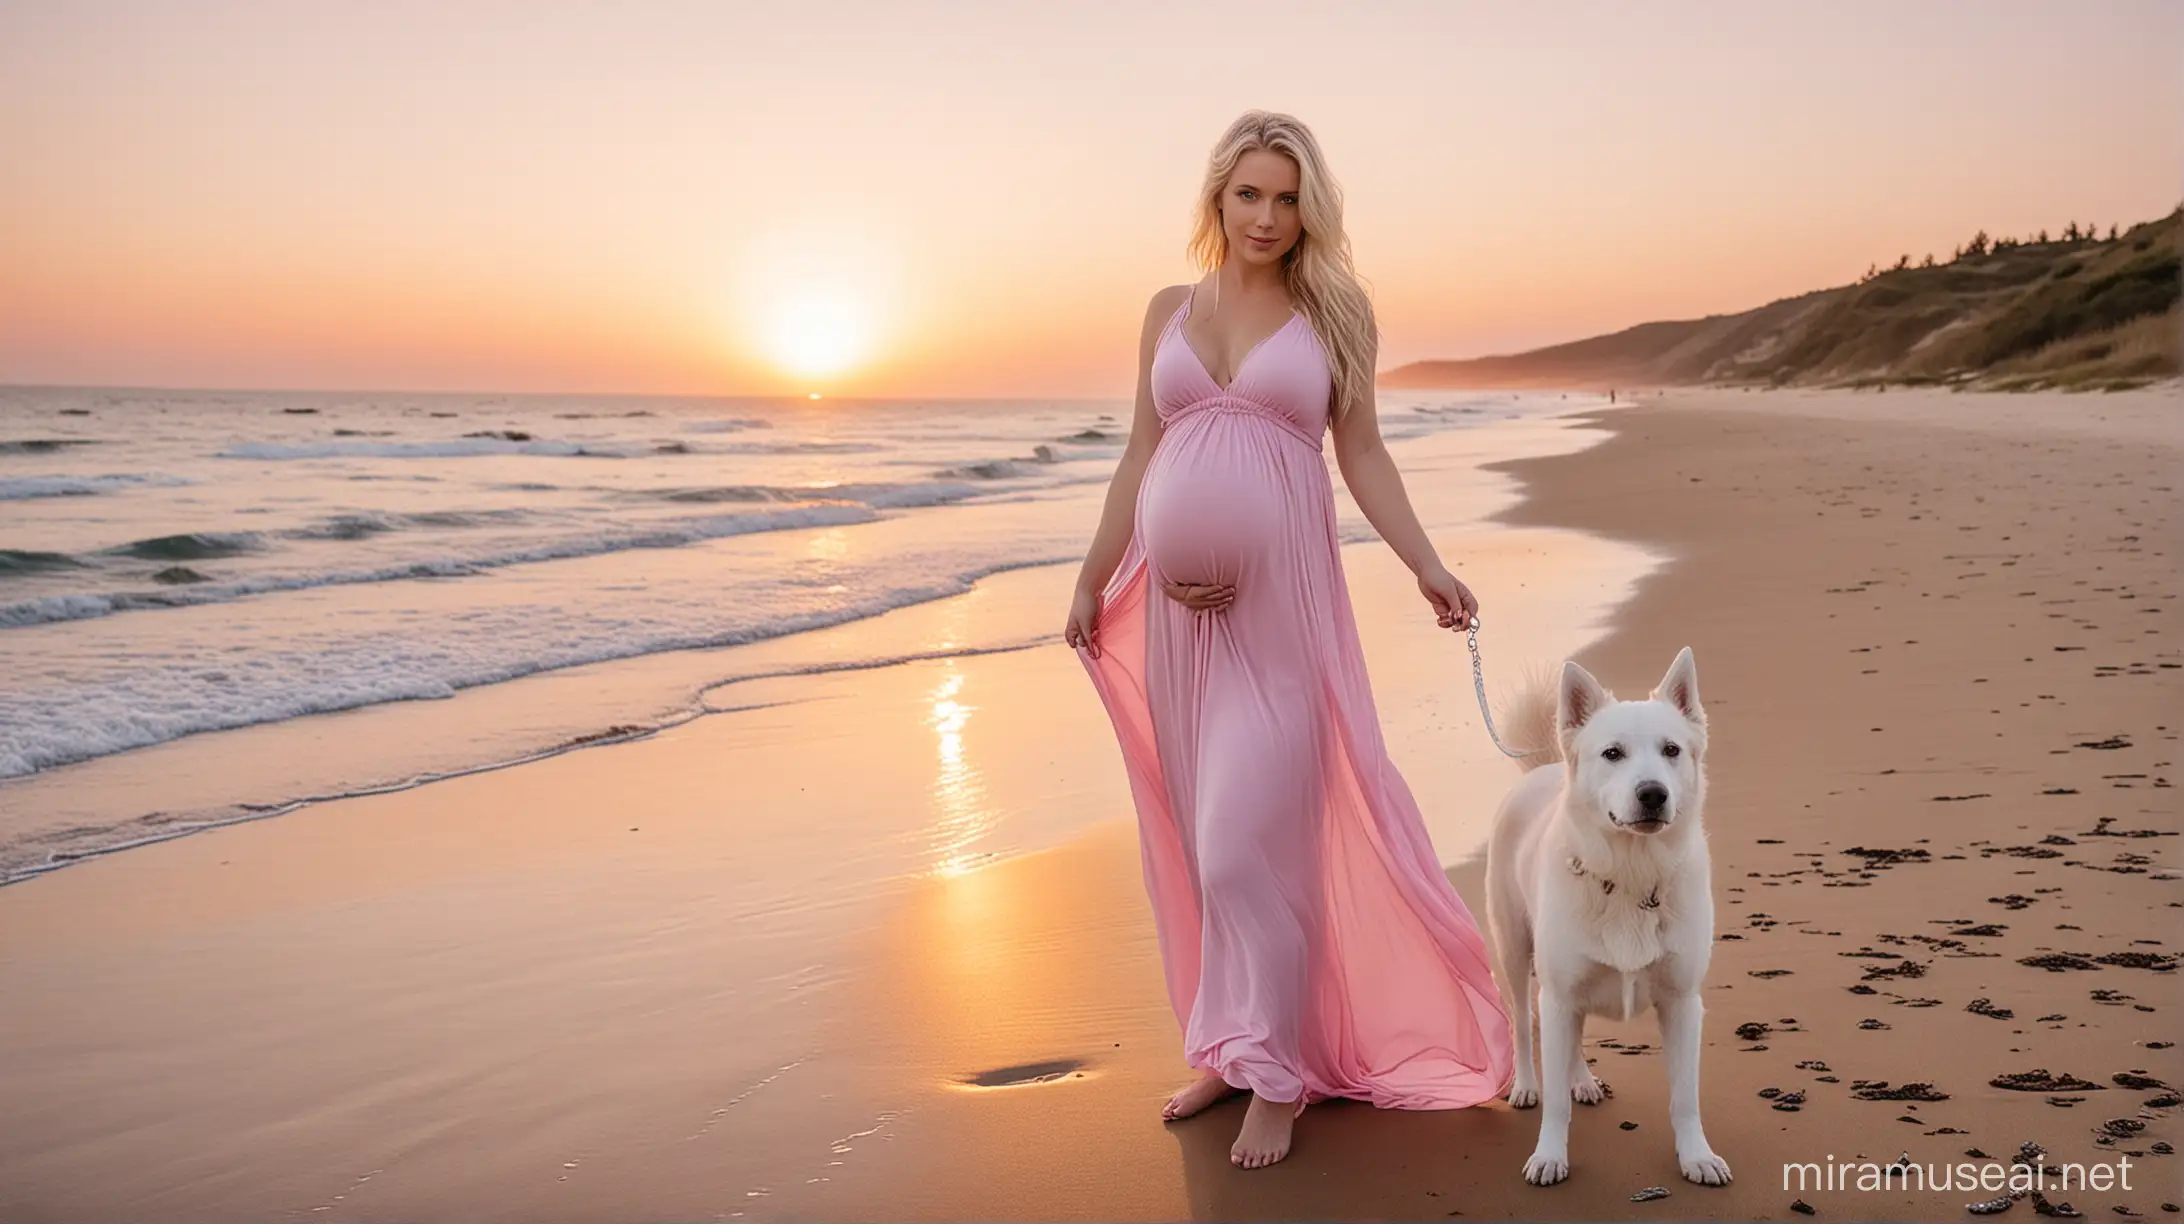 Beautiful Blonde Girl with Blue Eyes and Dog at Sunset Beach Maternity Photoshoot